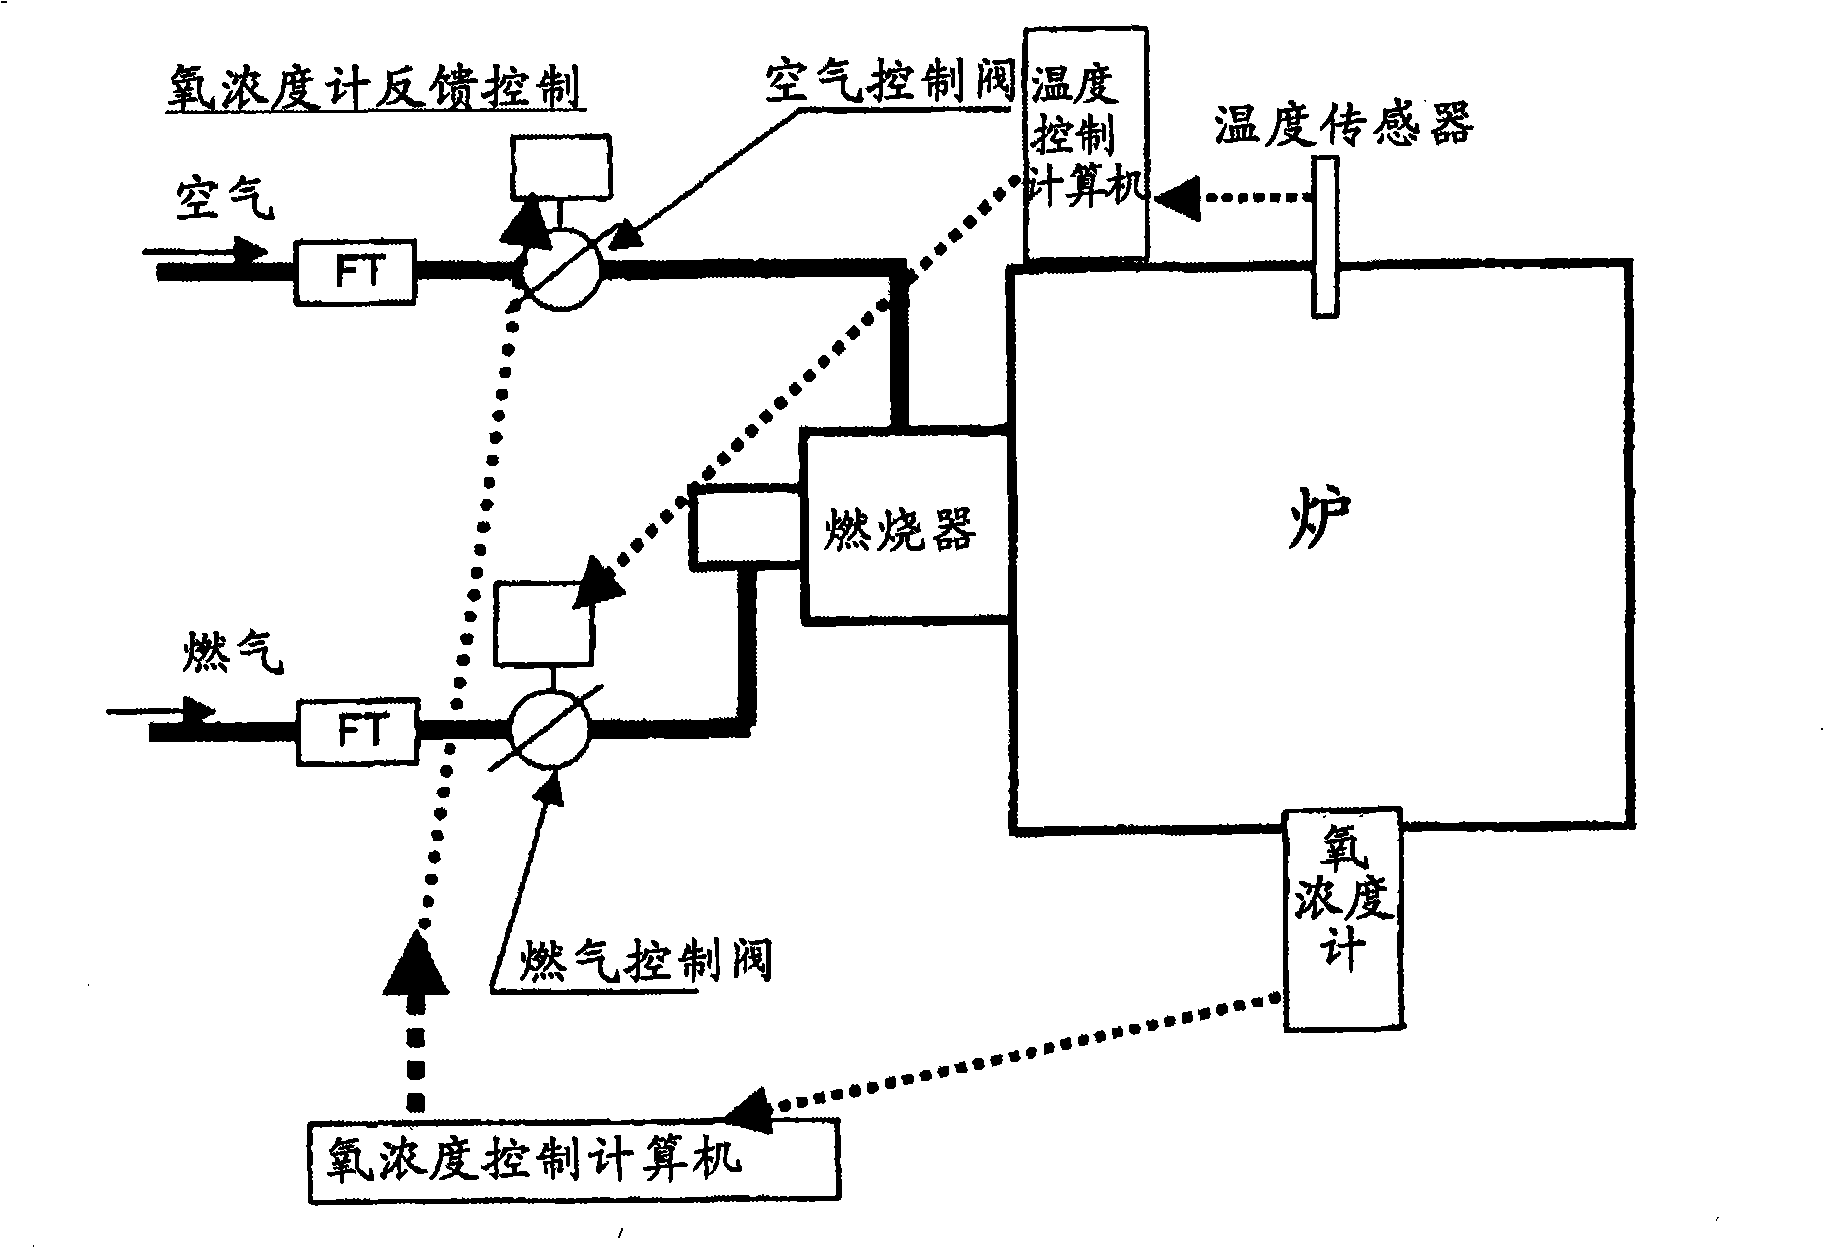 Air-fuel ratio control system of combustion heating furnace